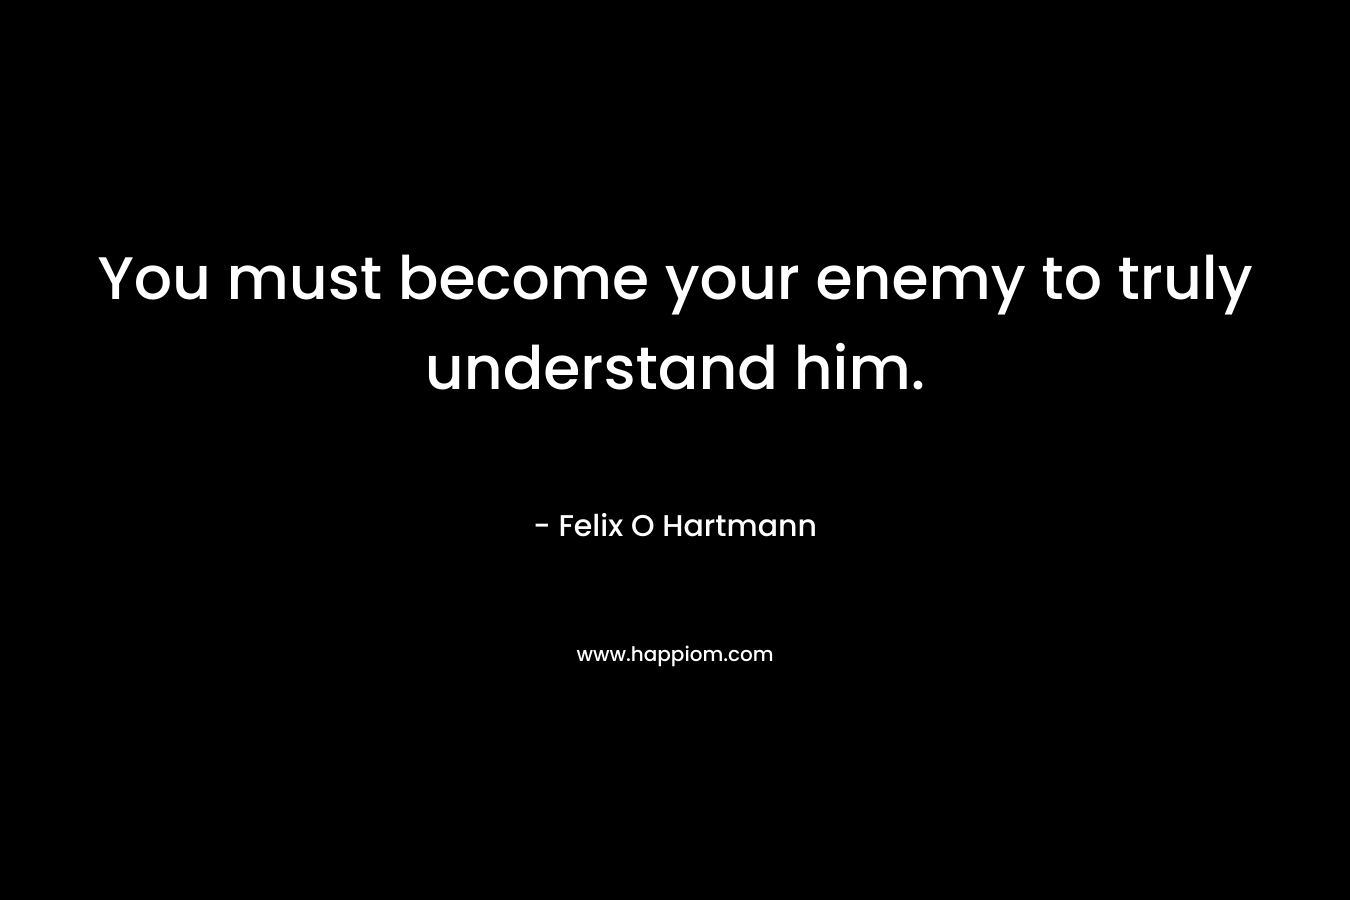 You must become your enemy to truly understand him. – Felix O Hartmann